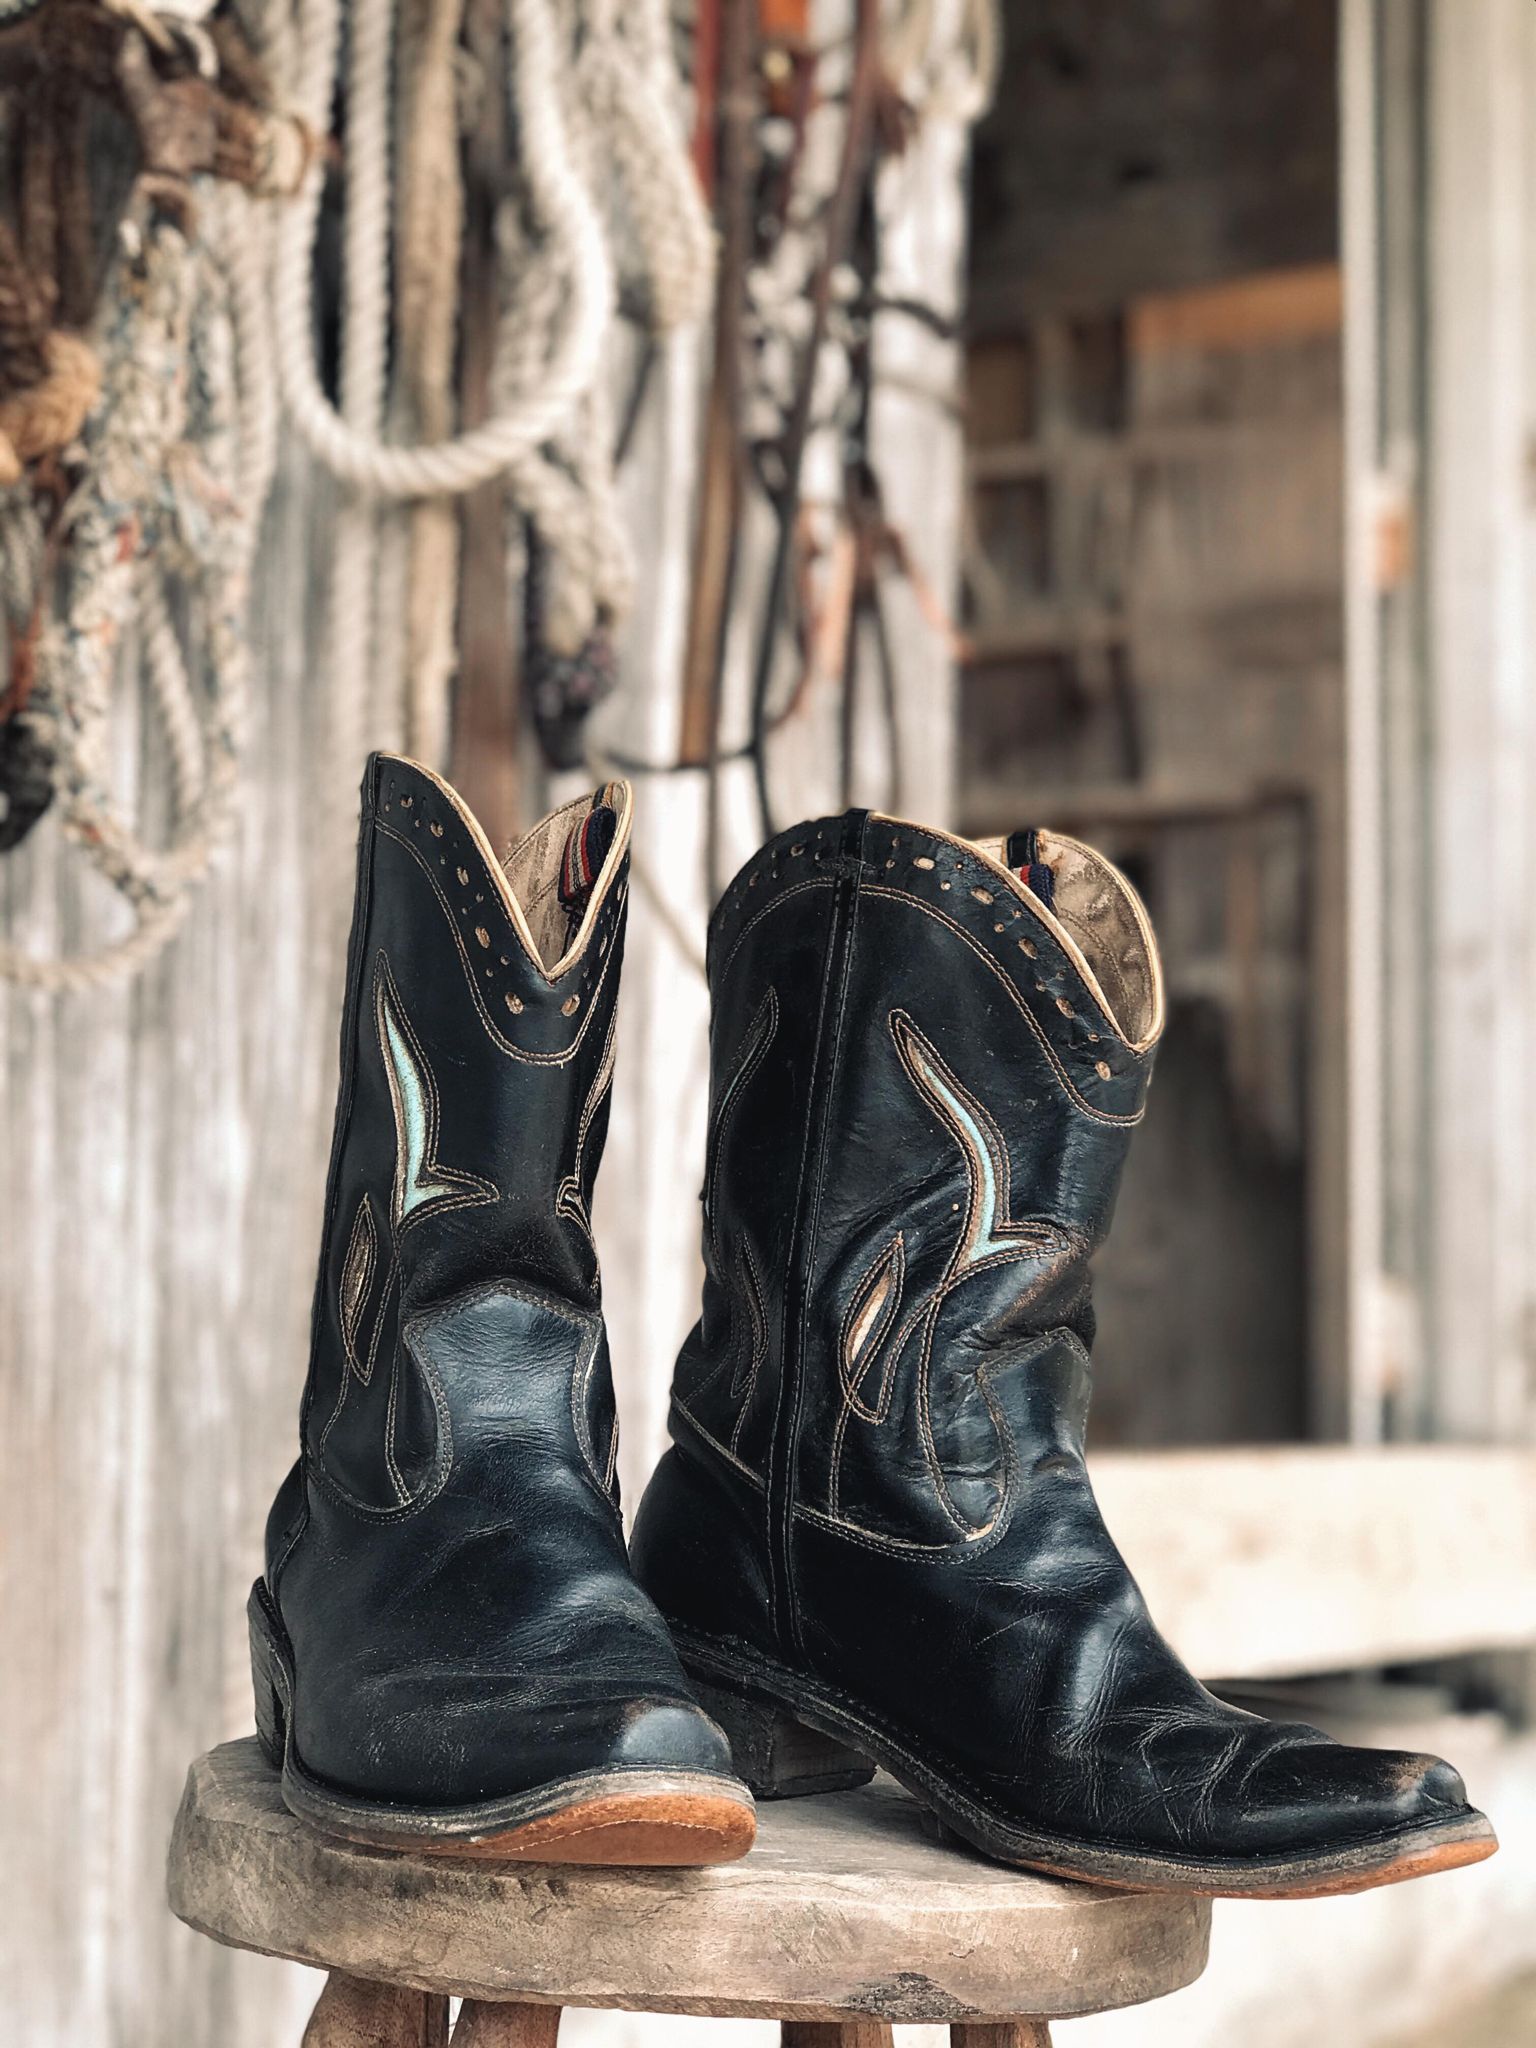 Vintage Cowboy Boots from the 1950's